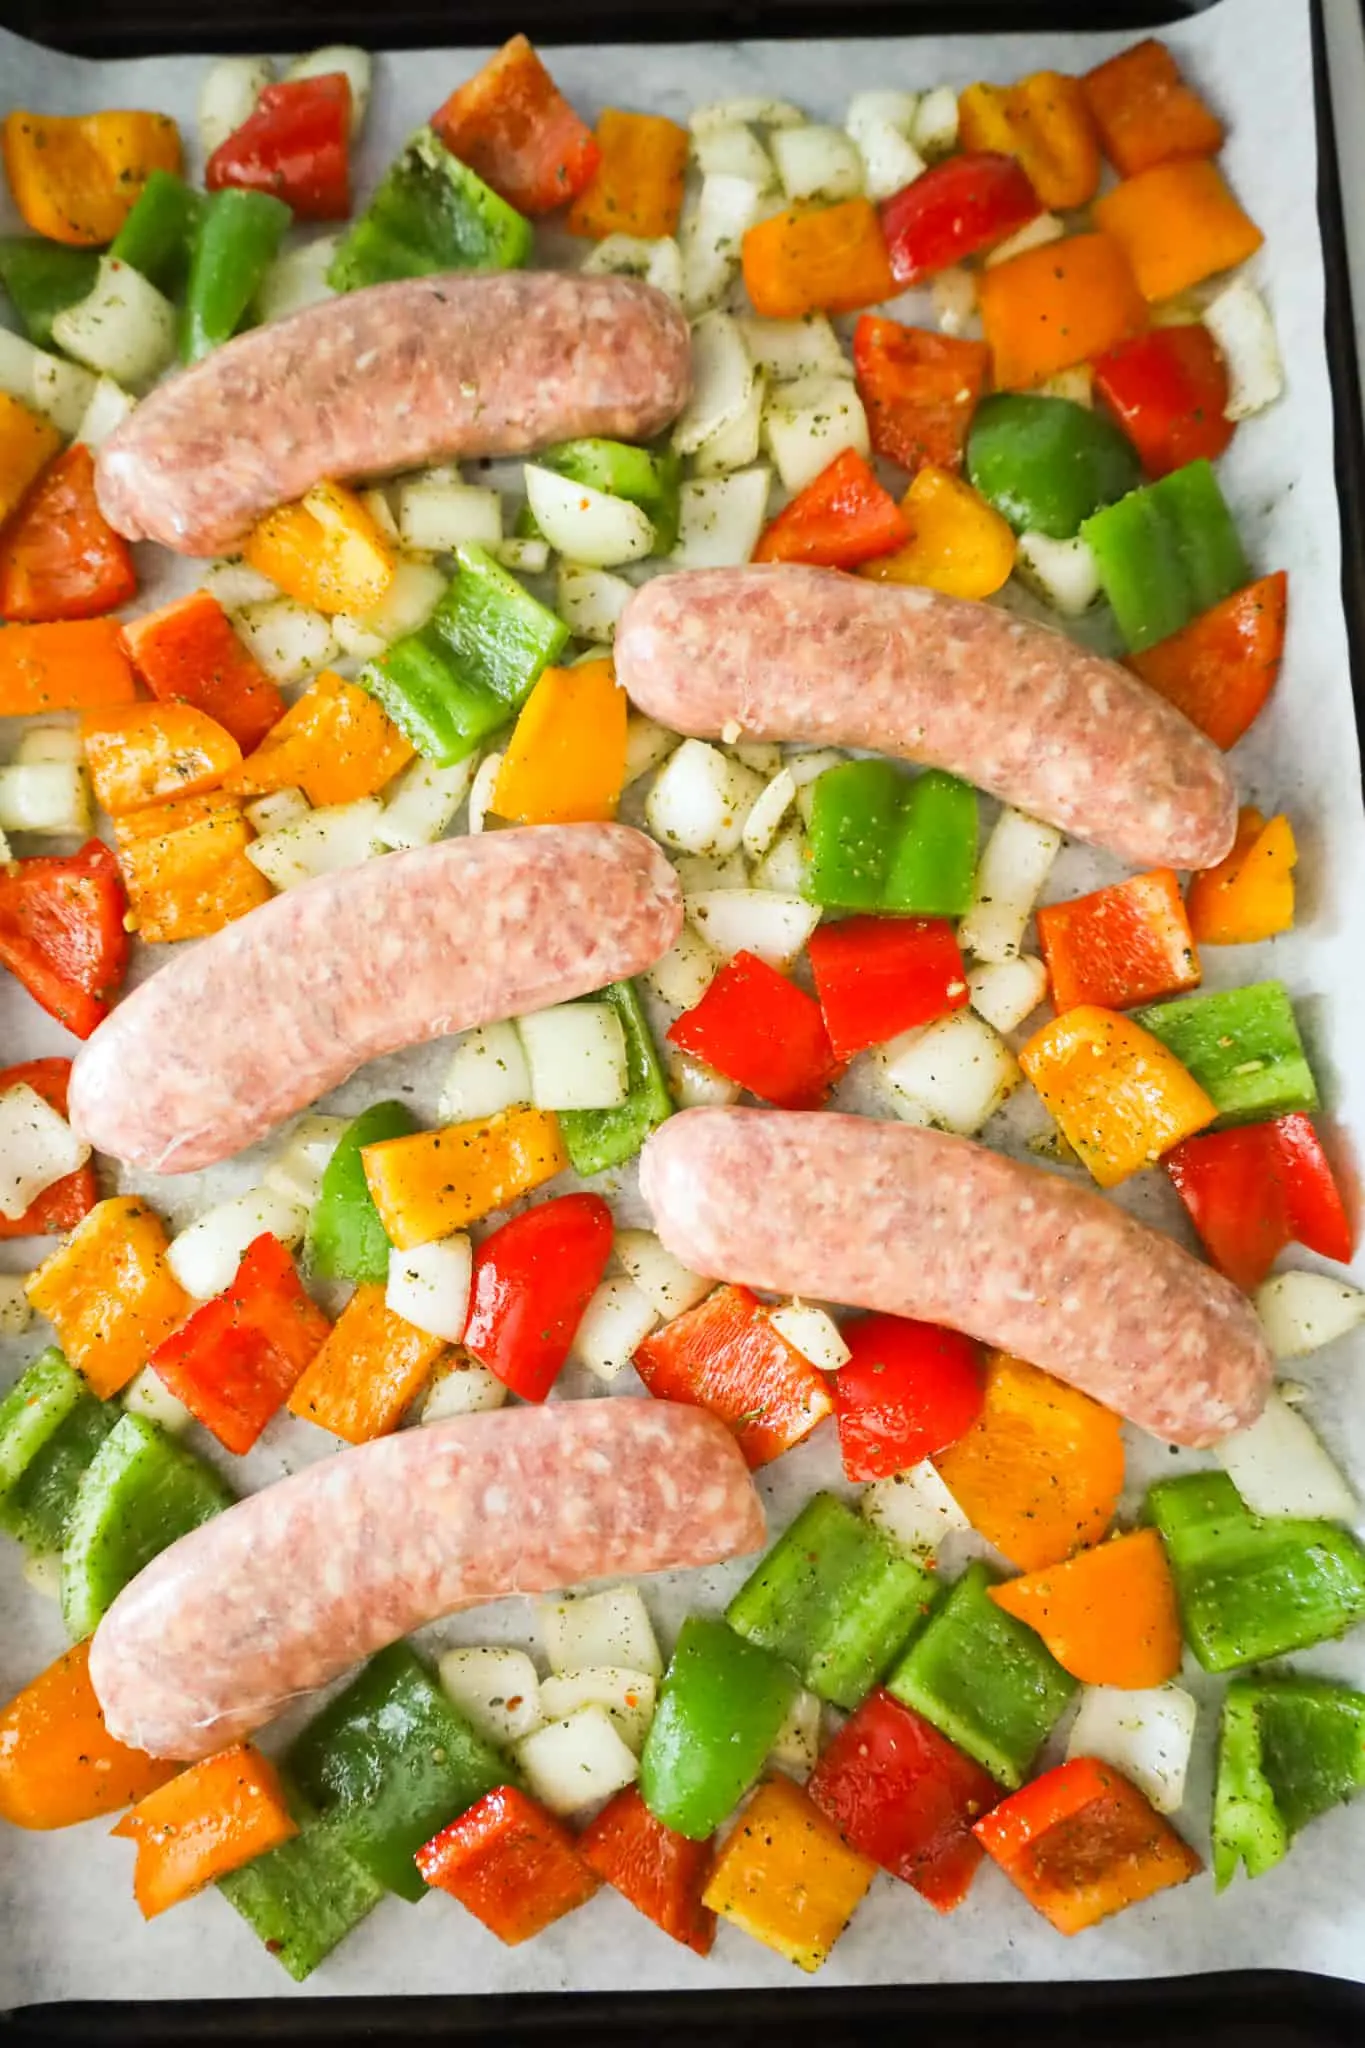 raw Italian sausage and peppers on a baking sheet